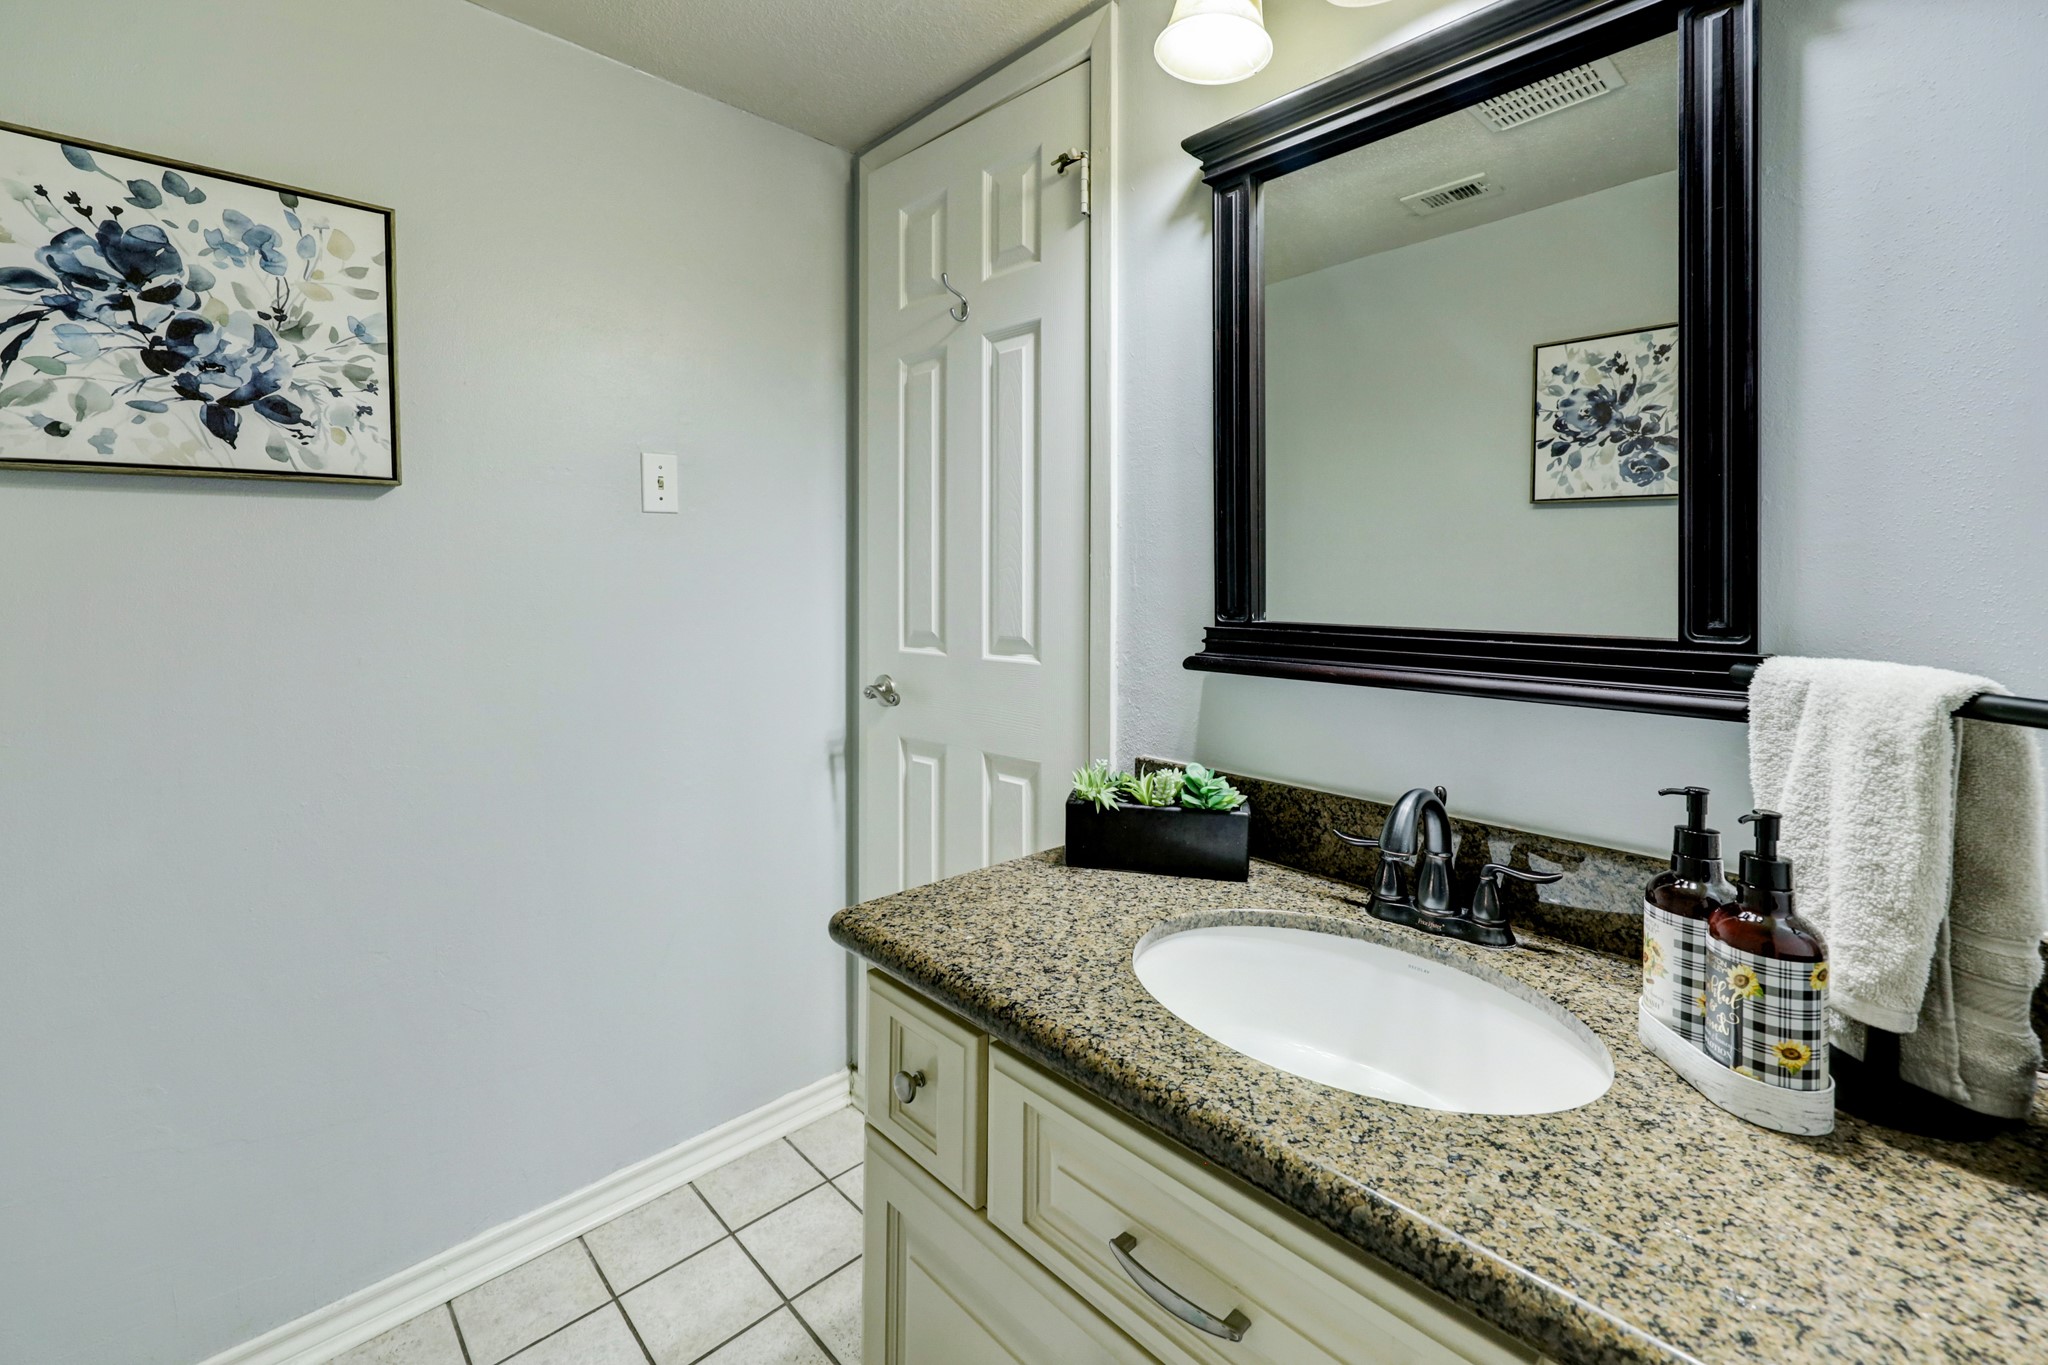 Conveniently located between the kitchen and the dining room is the half bathroom.